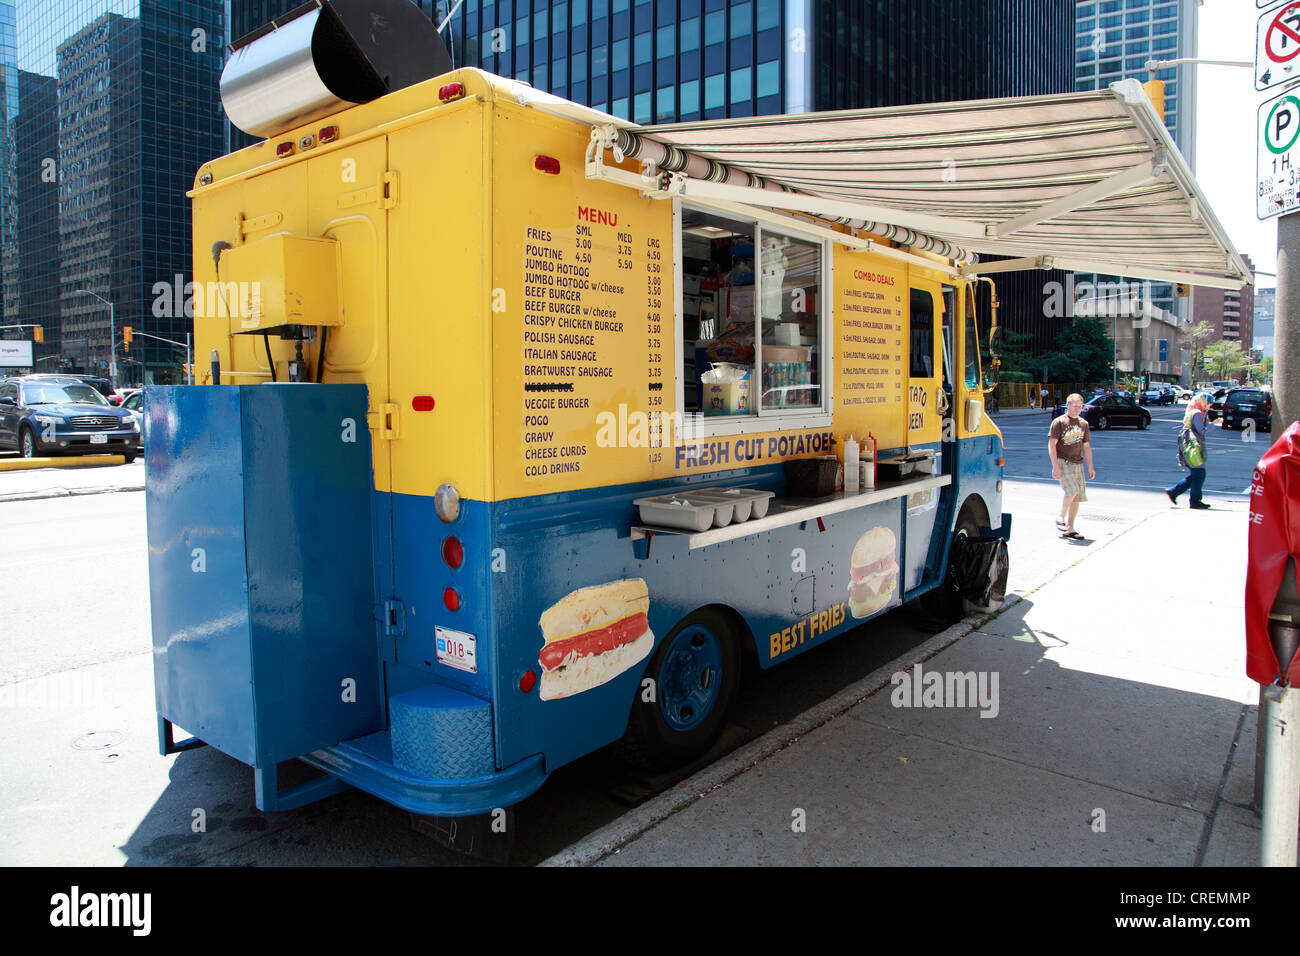 Chip Truck On The Street In Ottawa Canada Serving A Wide Variety Of Fast Food Stock Photo